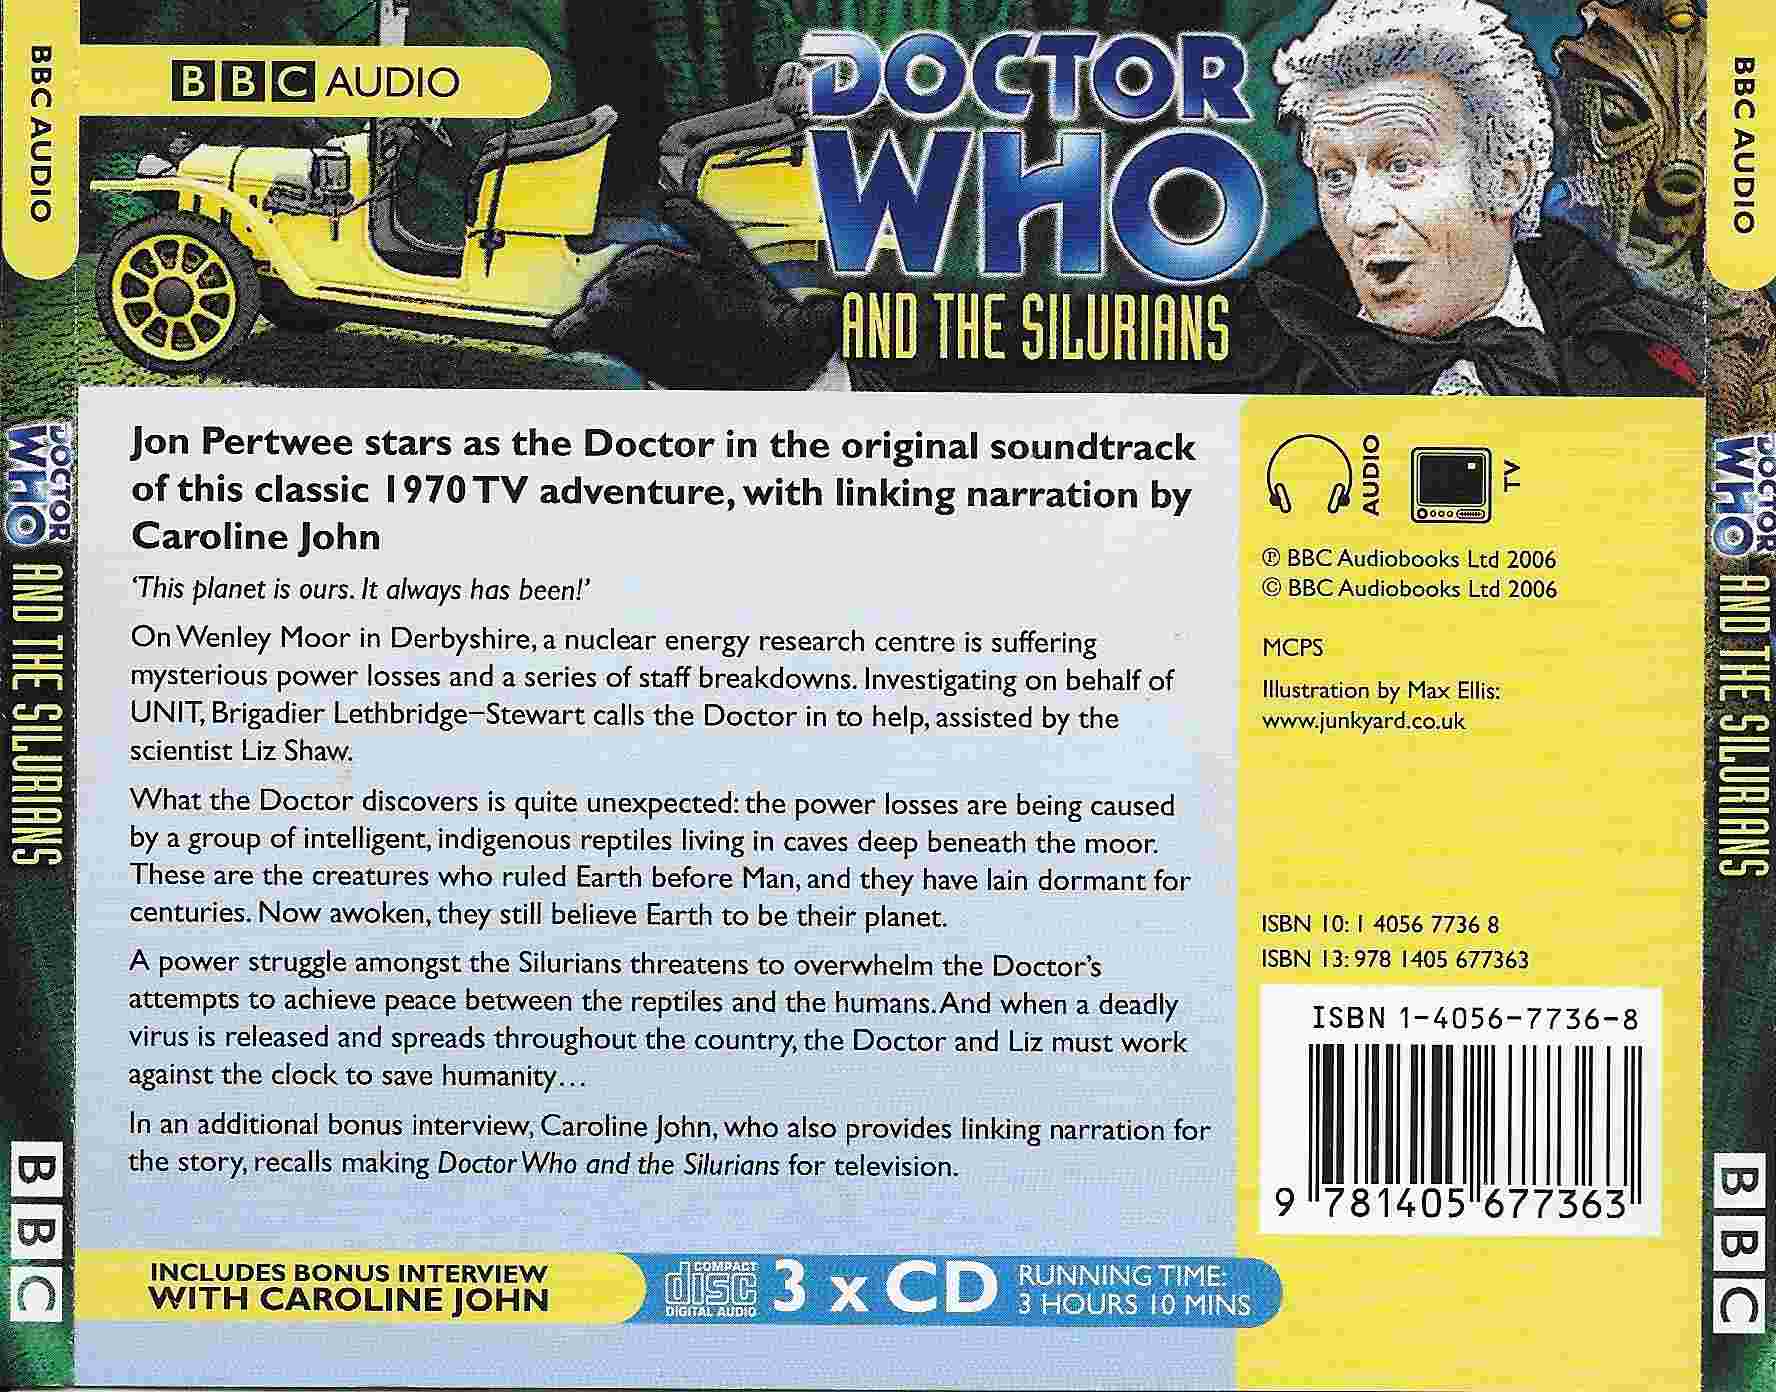 Picture of ISBN 1-4056-7736-8 Doctor Who - And the Silurians by artist Malcolm Hulke from the BBC records and Tapes library